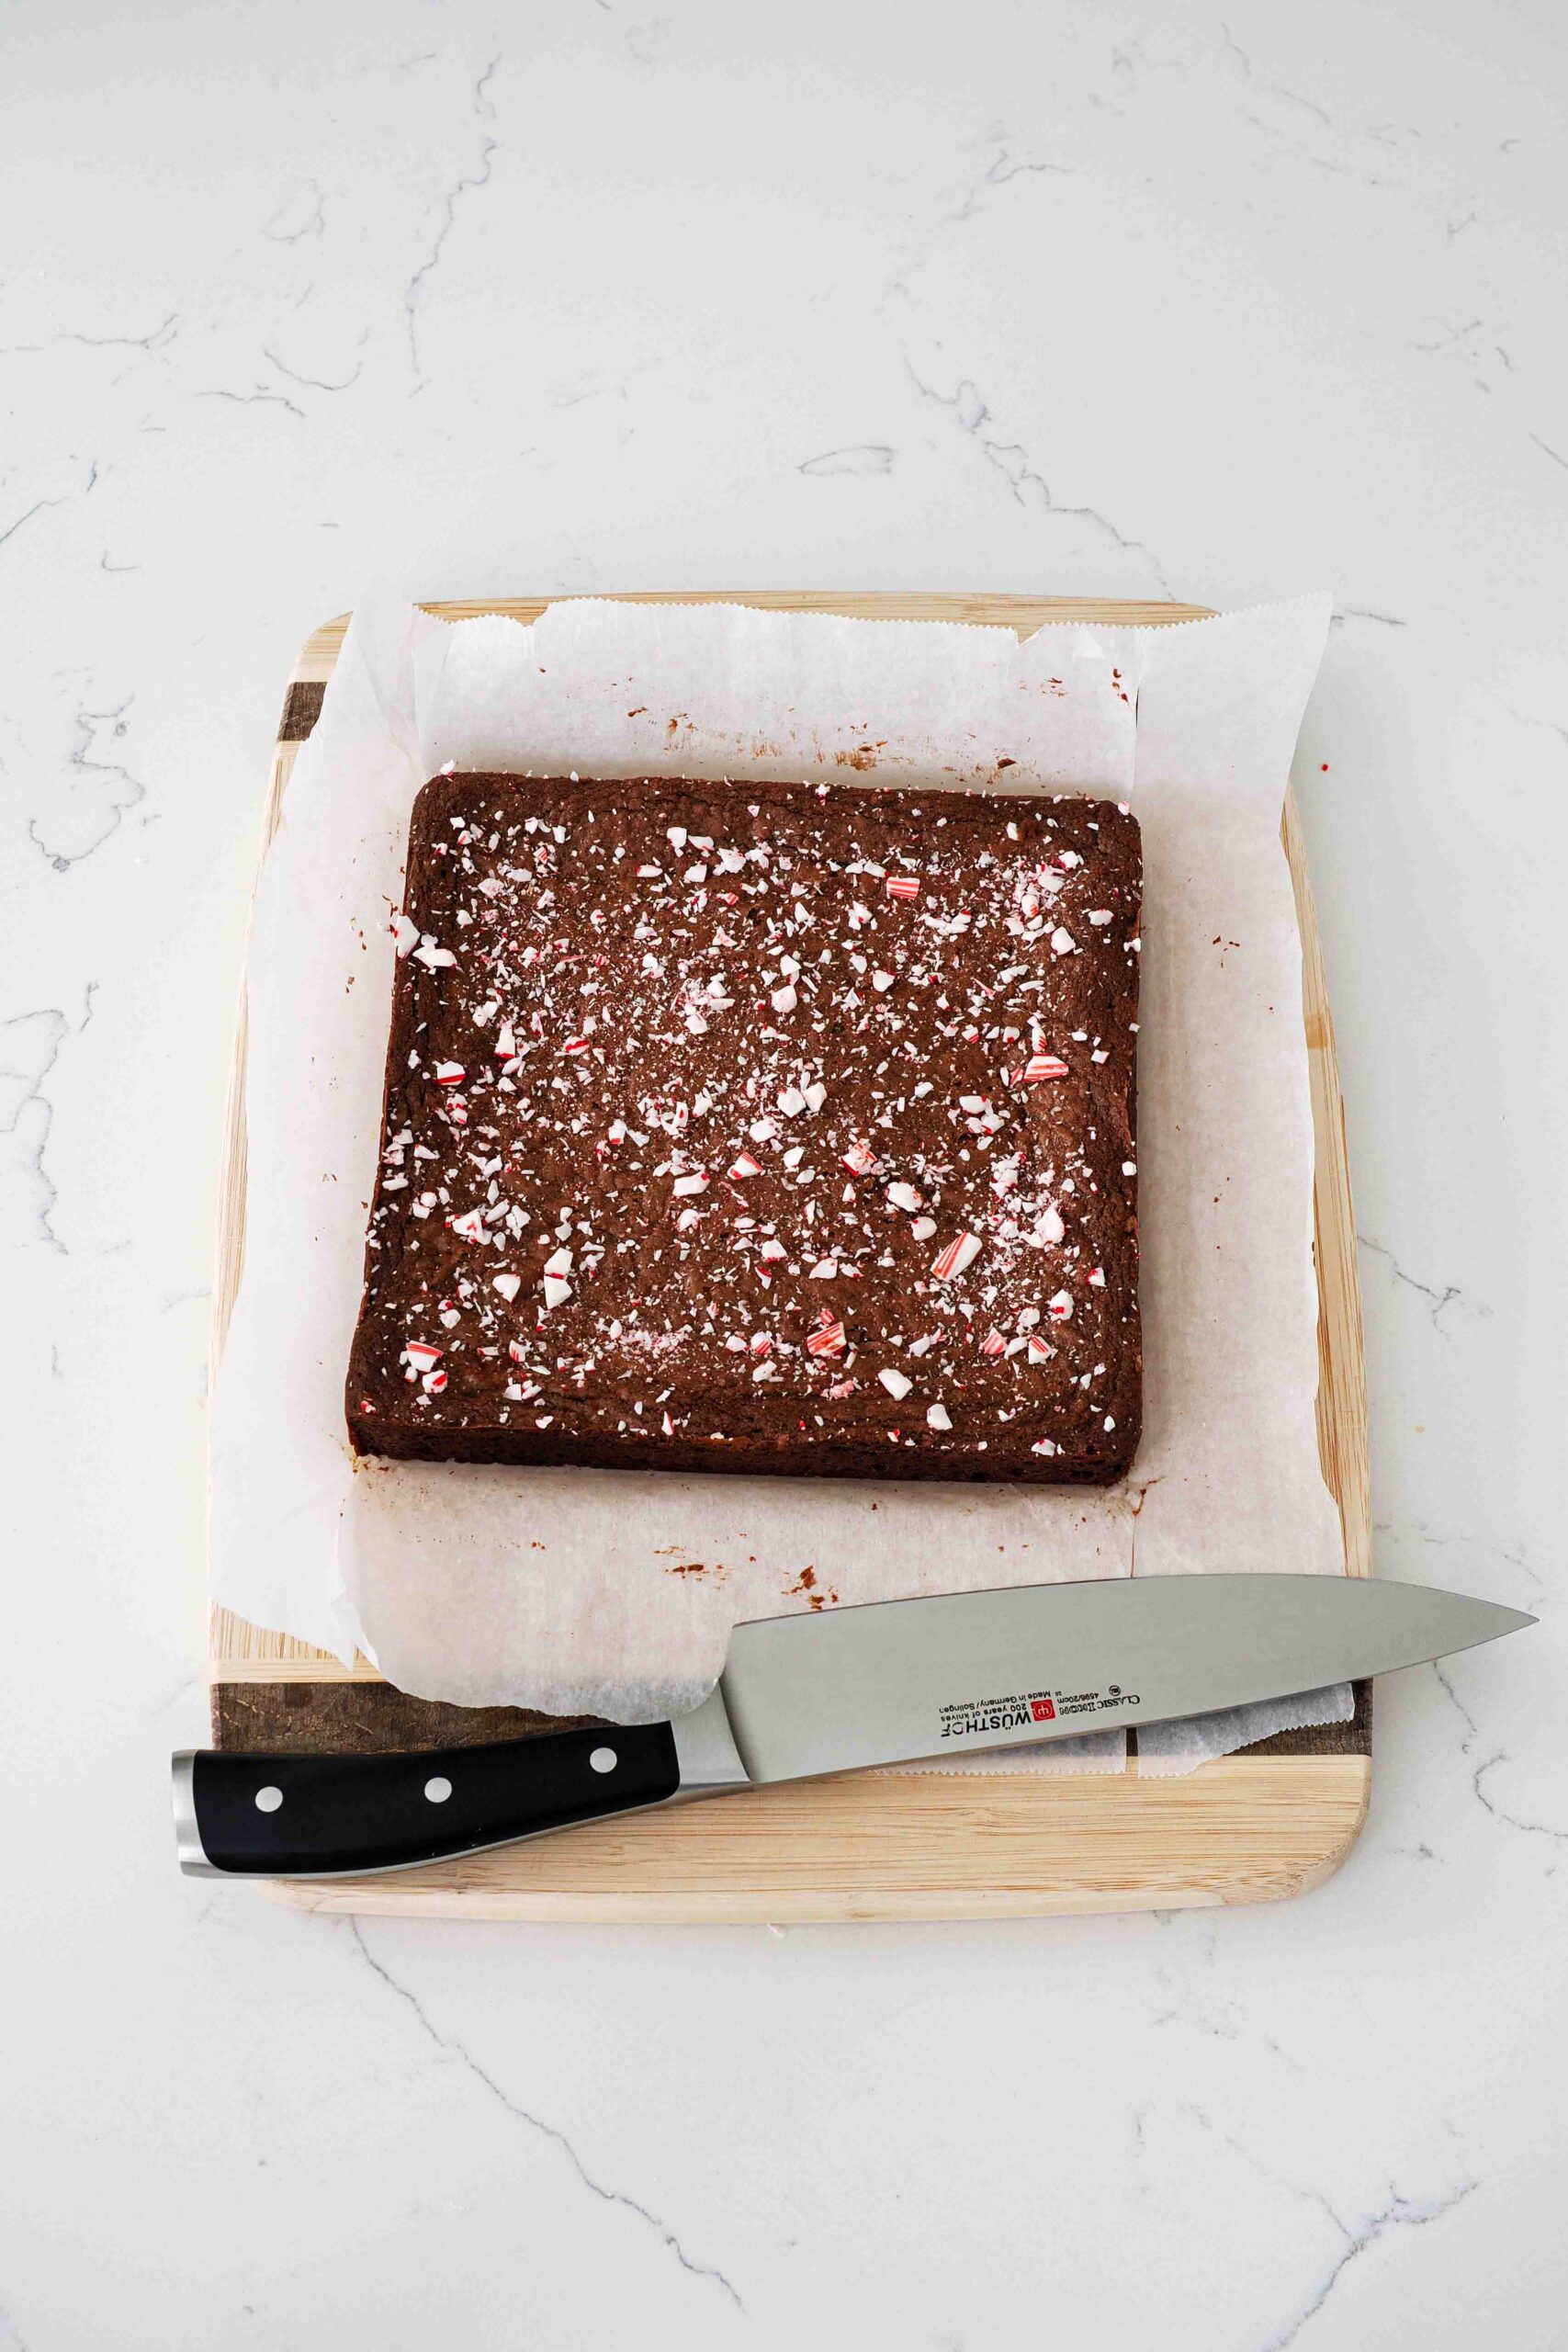 A slab of candy cane brownies cooling on a cutting board.